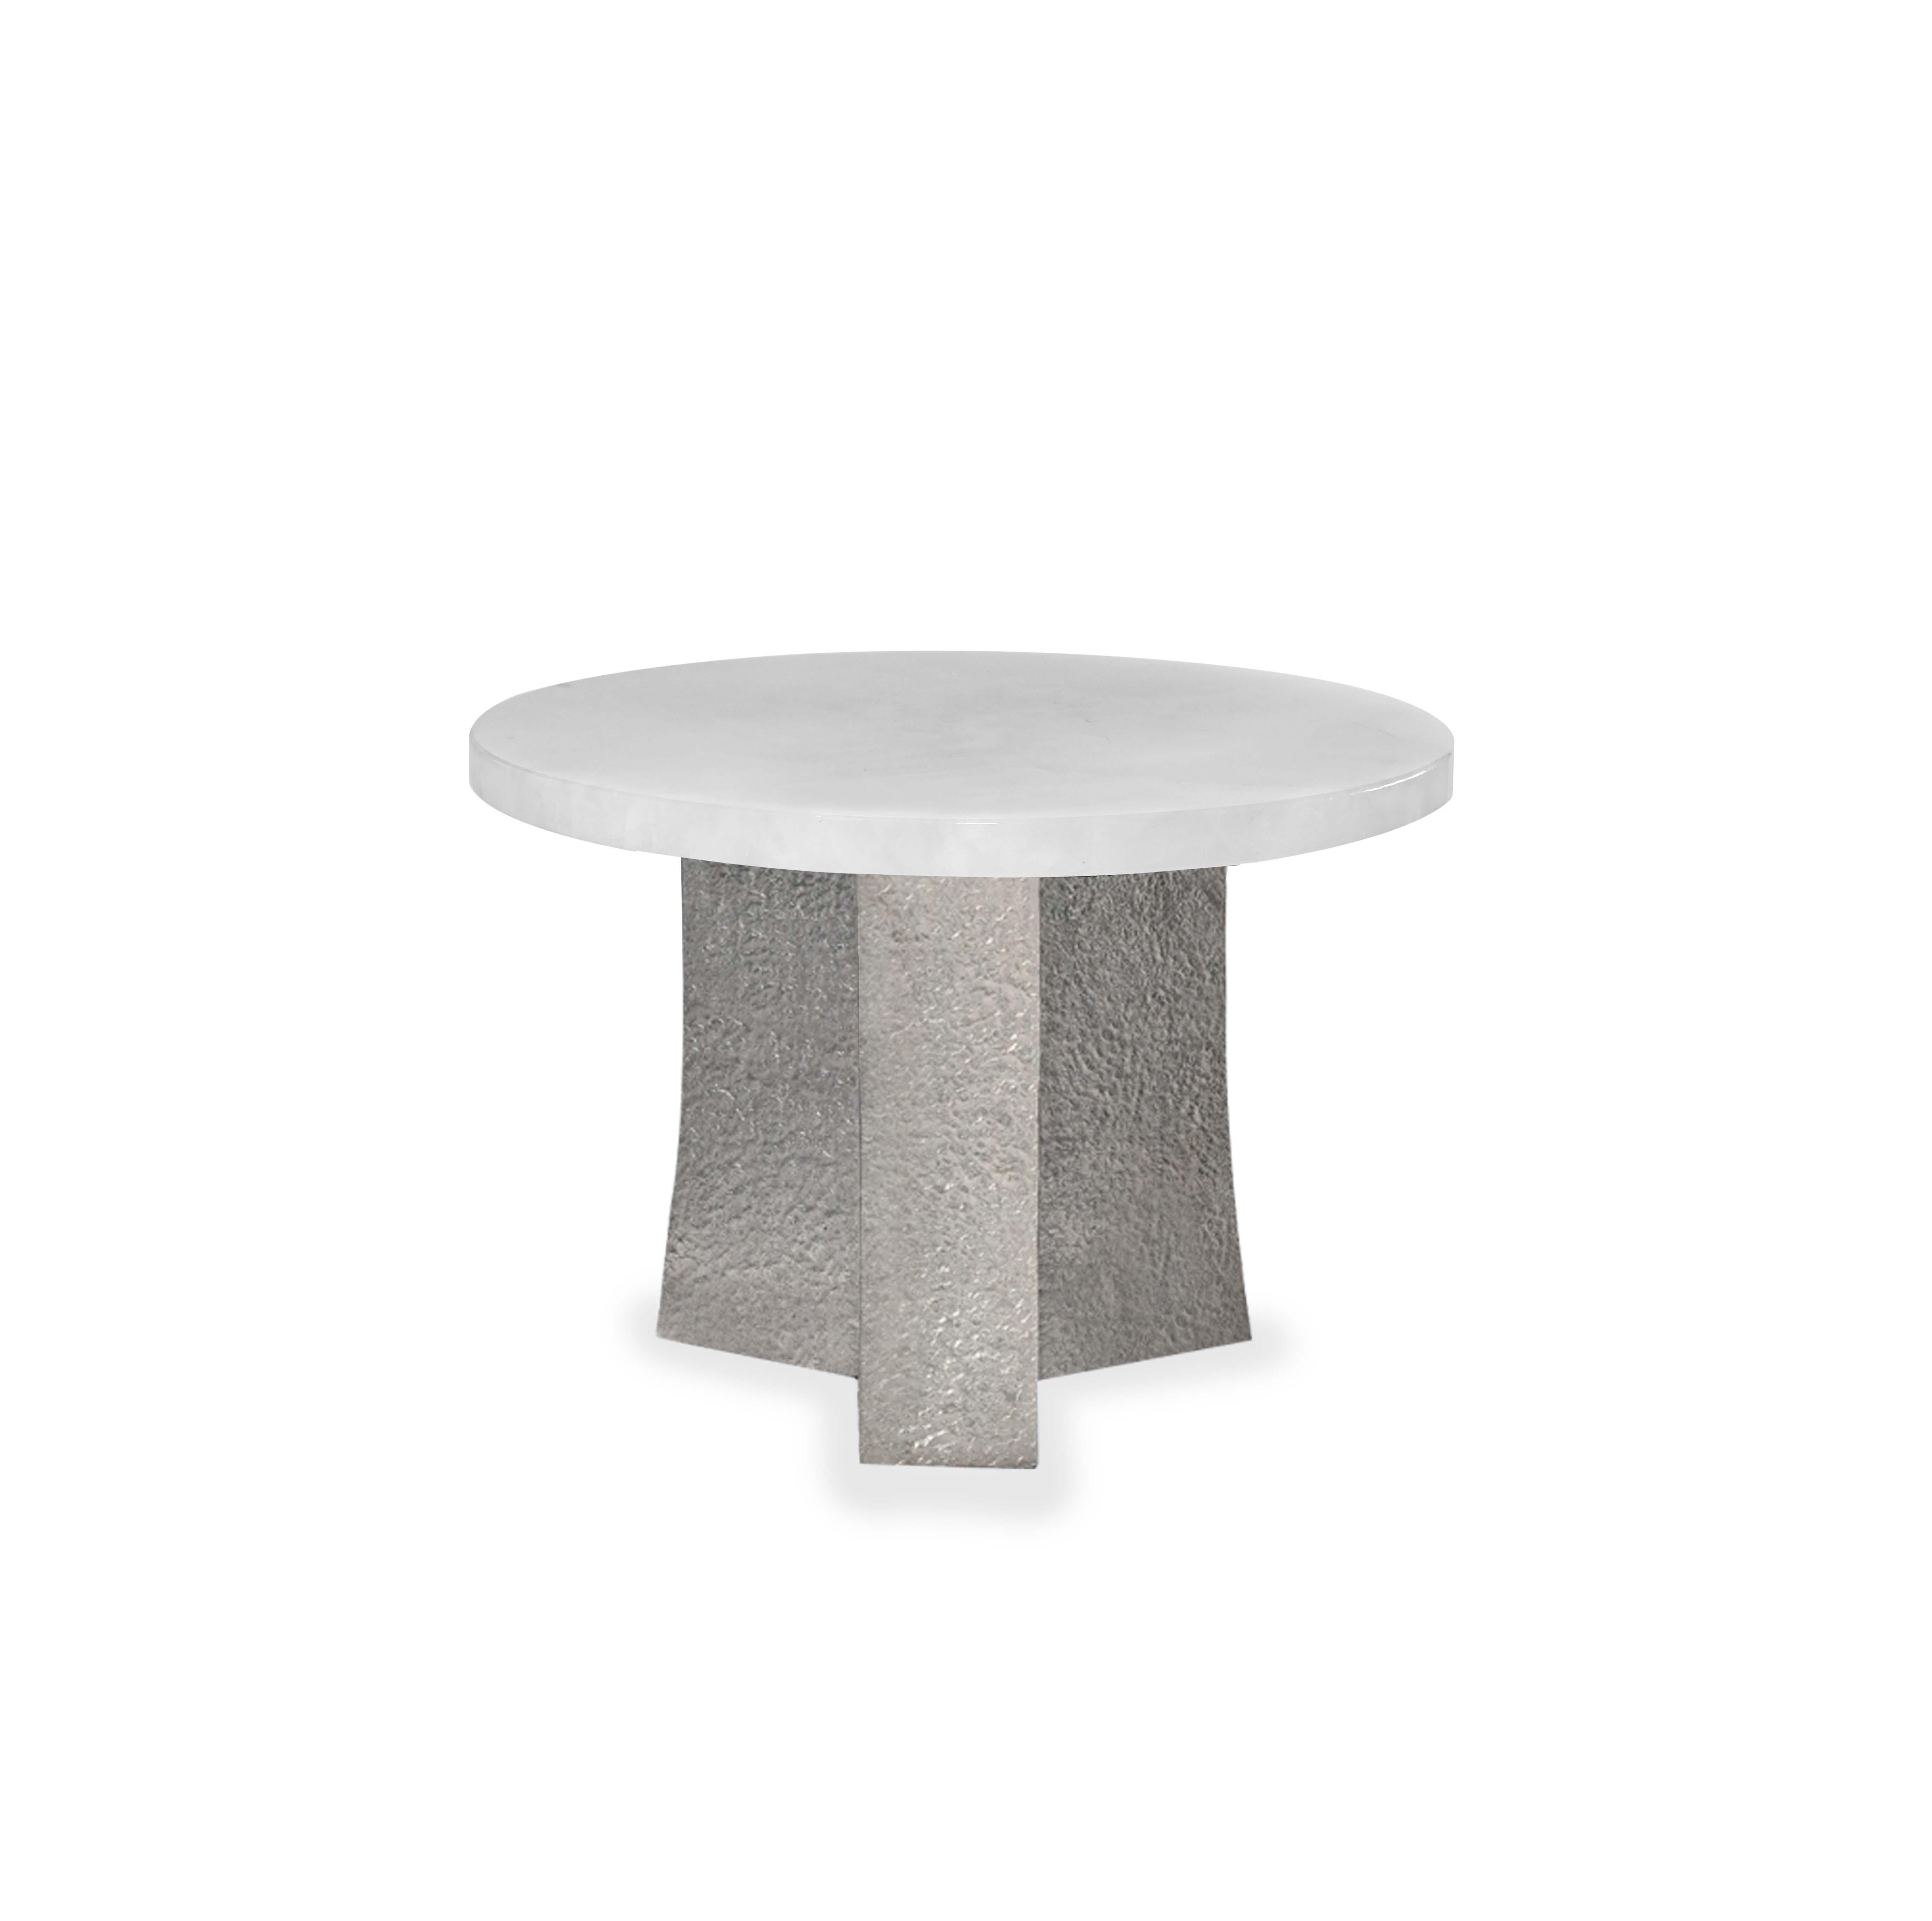 Rock crystal top cocktail table with hammered matte nickel stand. Created by Phoenix gallery.
Custom size and finish upon request.